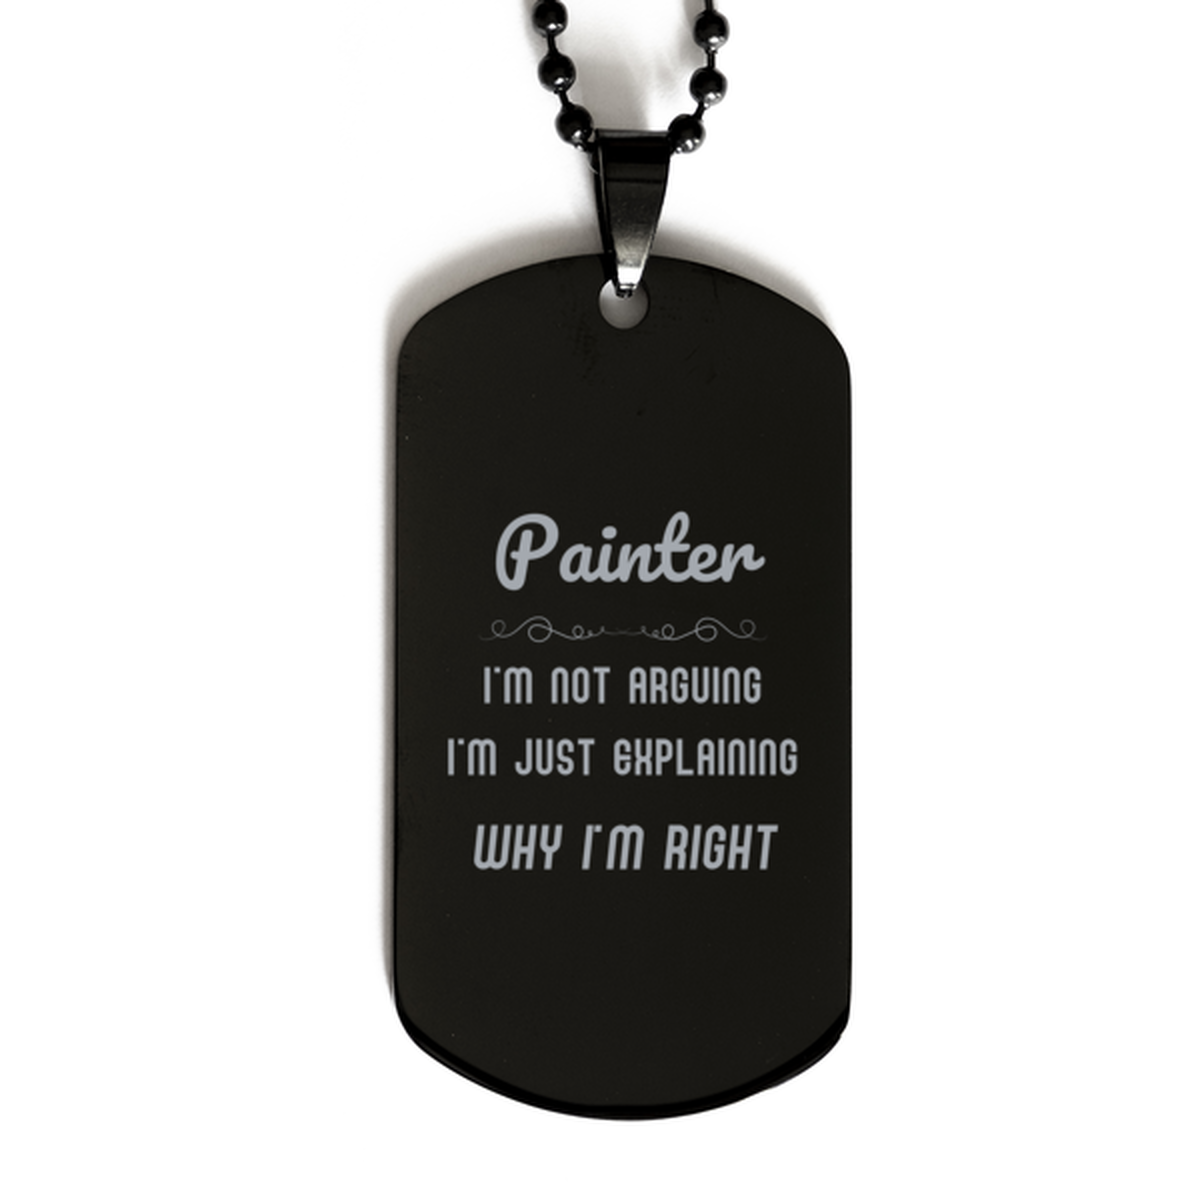 Painter I'm not Arguing. I'm Just Explaining Why I'm RIGHT Black Dog Tag, Funny Saying Quote Painter Gifts For Painter Graduation Birthday Christmas Gifts for Men Women Coworker